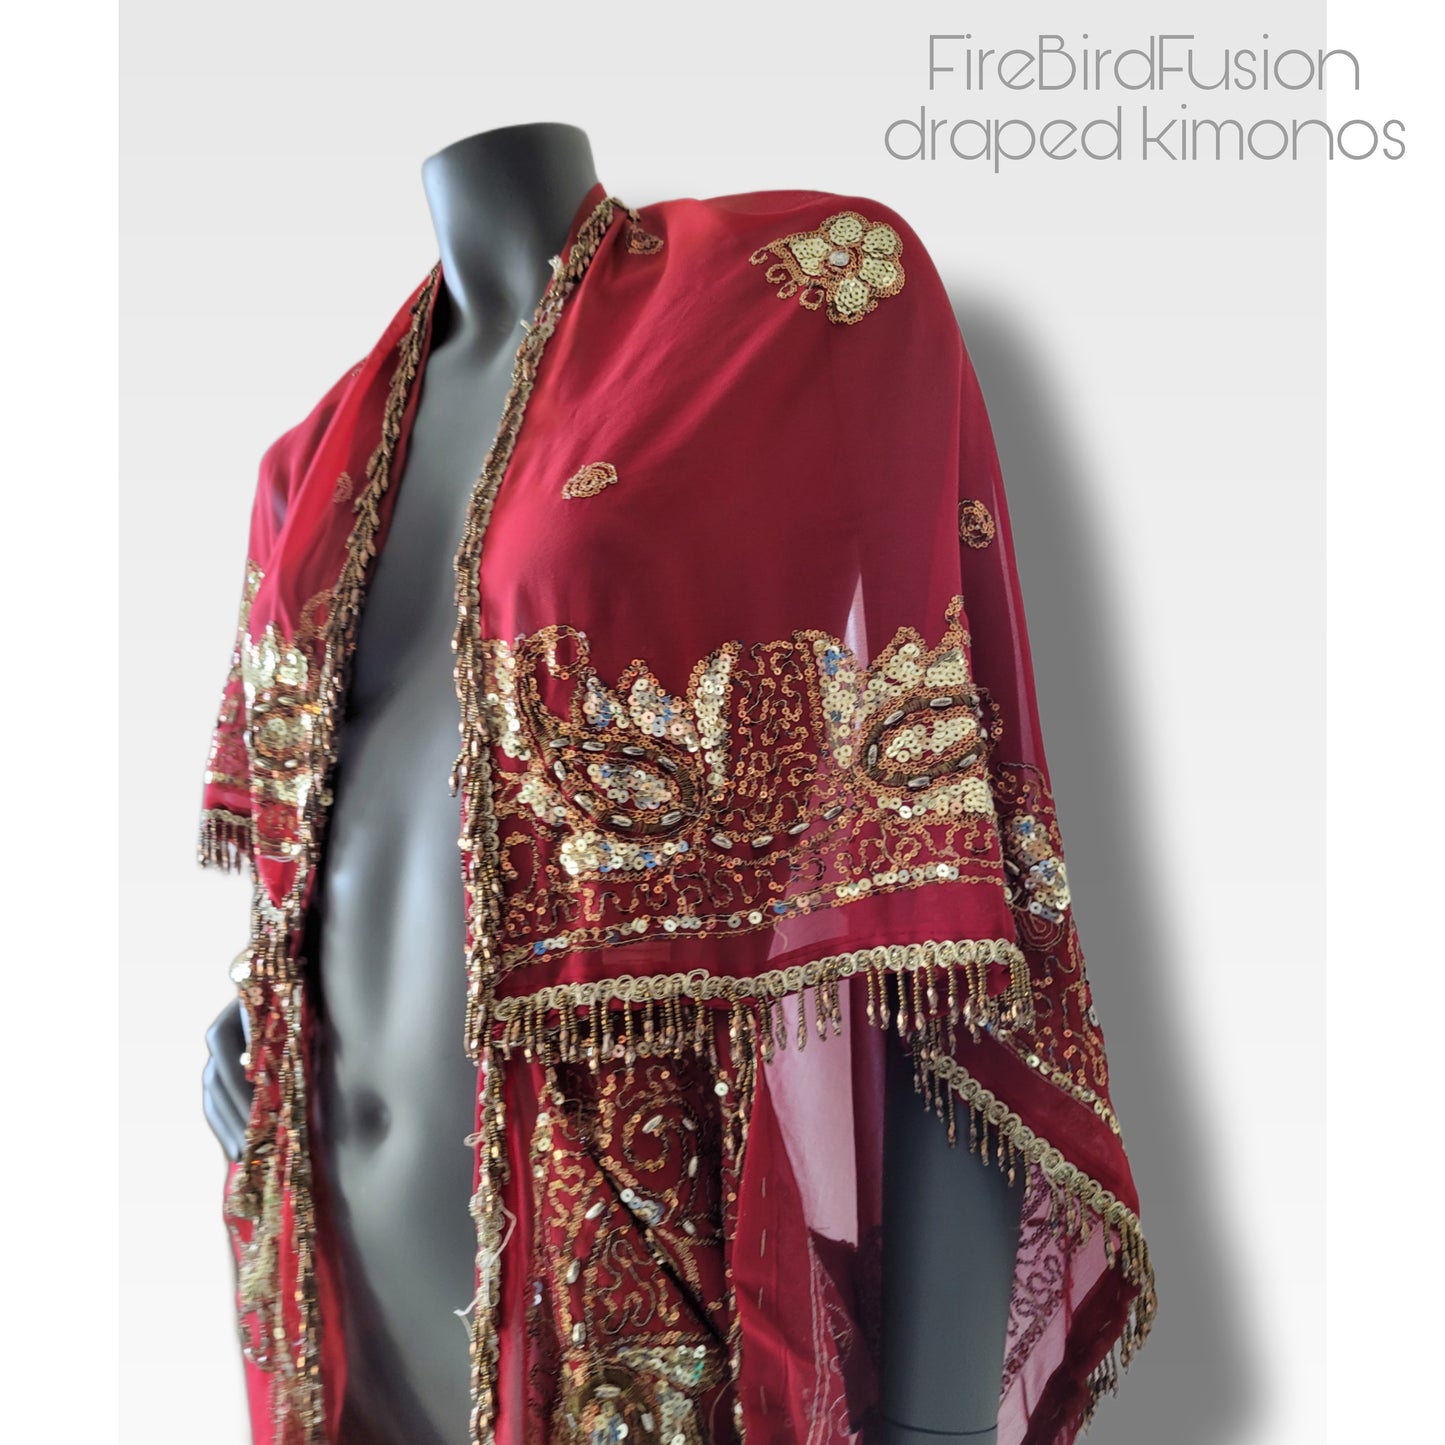 Draped kimono in red with elaborated hand embrodery in gold with beaded fringe (M)